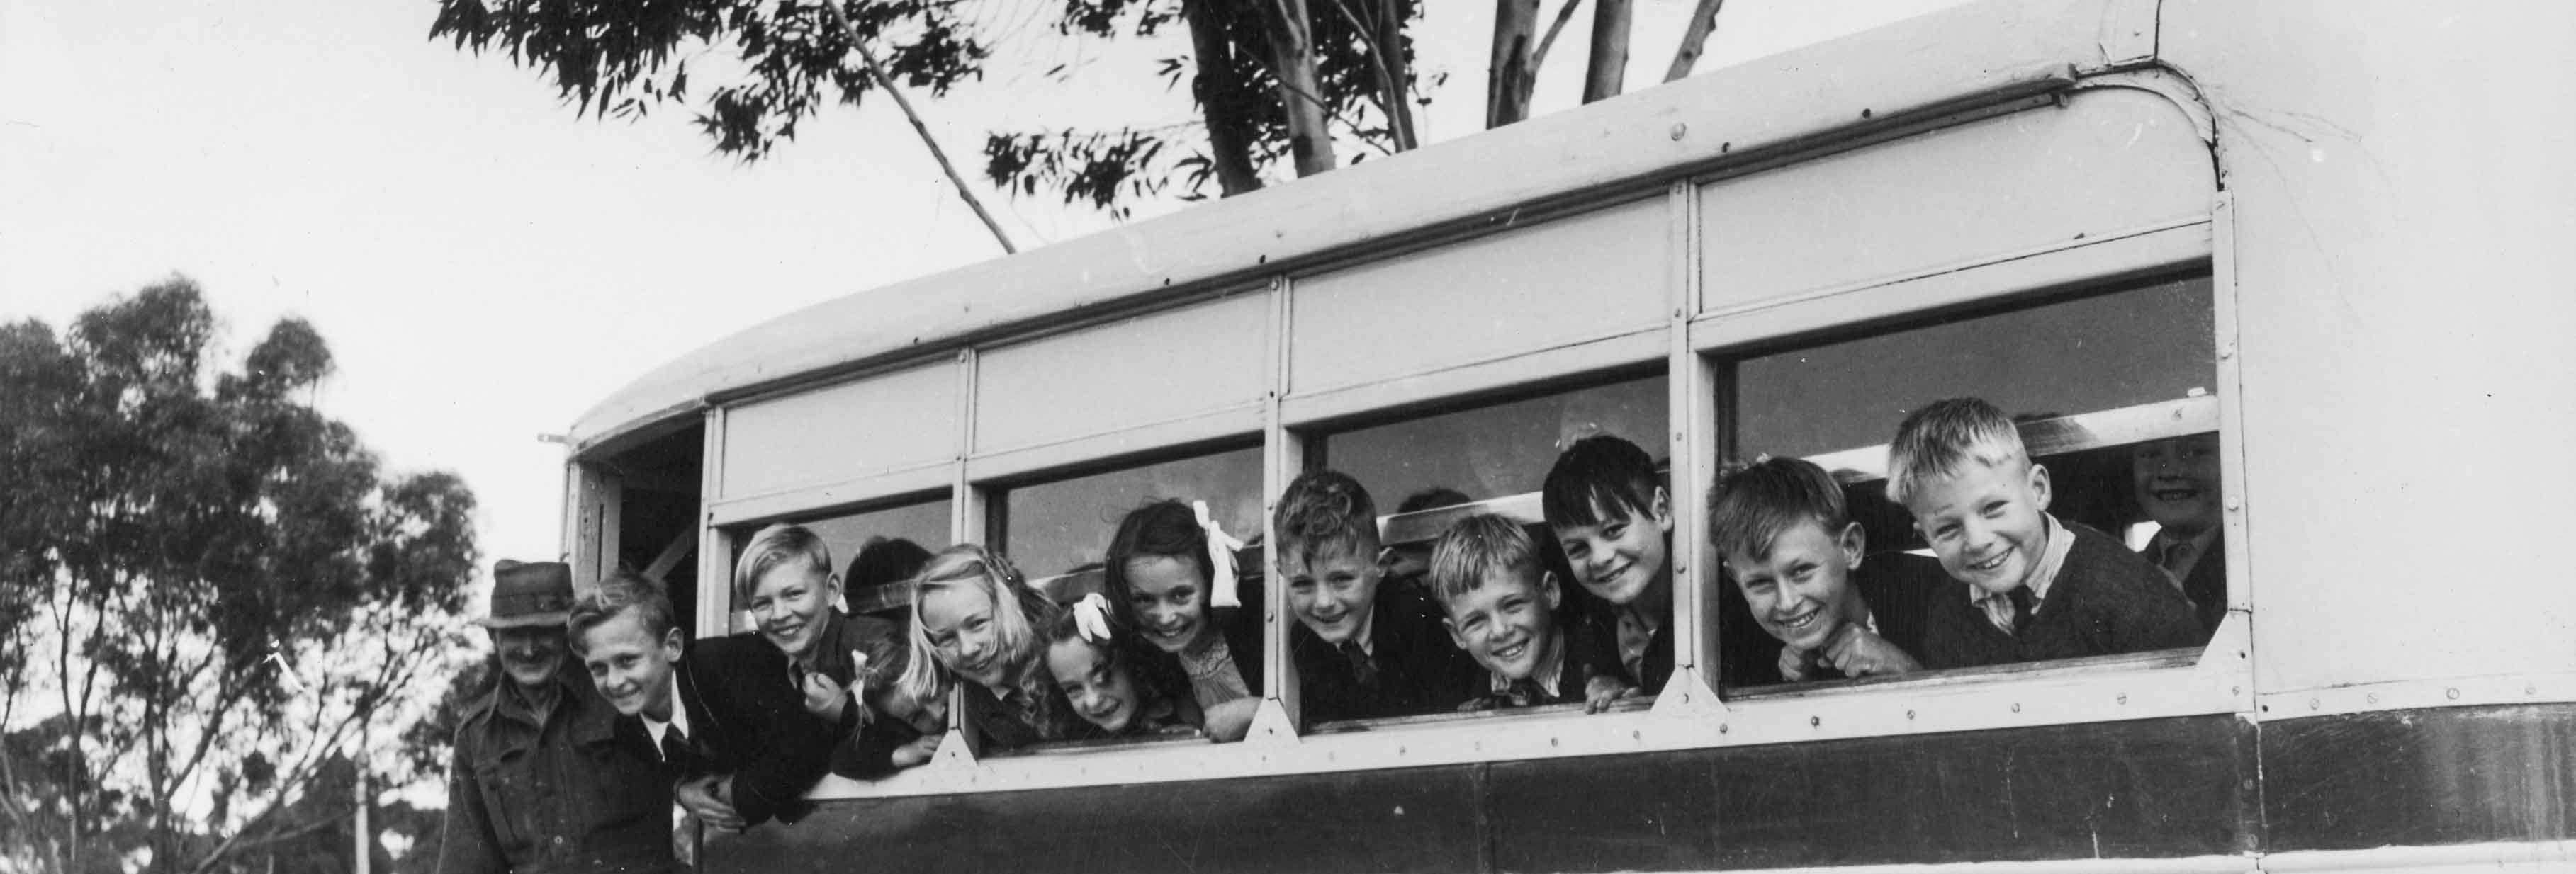 Black and white photo of kids on a school bus